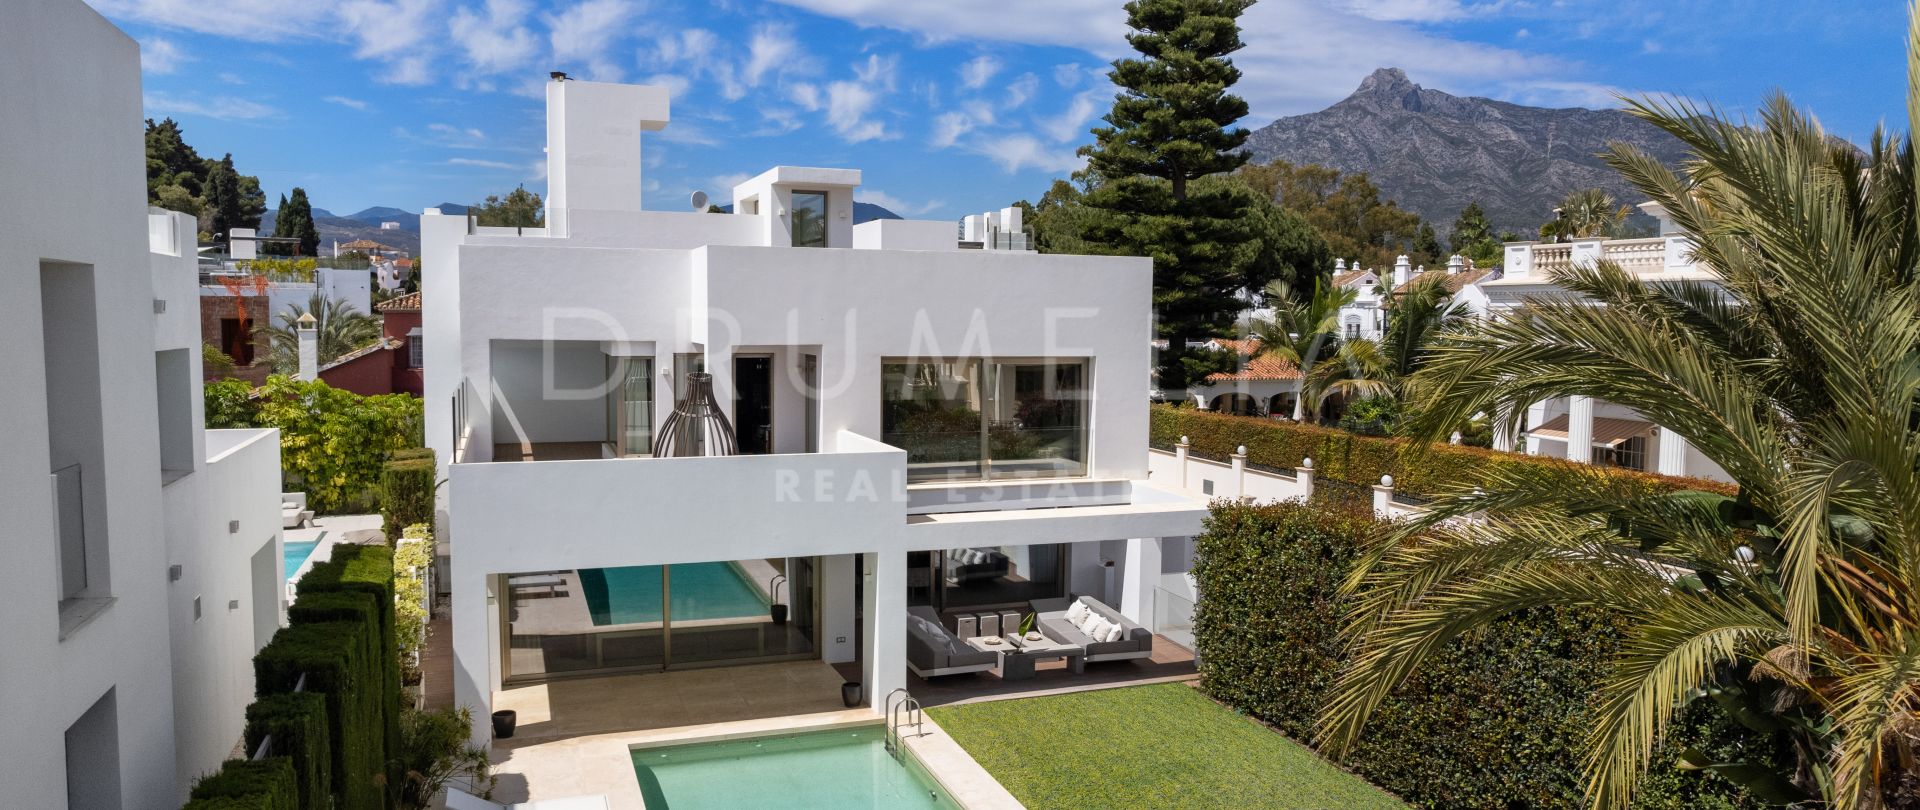 Luxury villa in the exclusive Rio Verde Playa, modern design with state-of-the-art technology, Marbella.